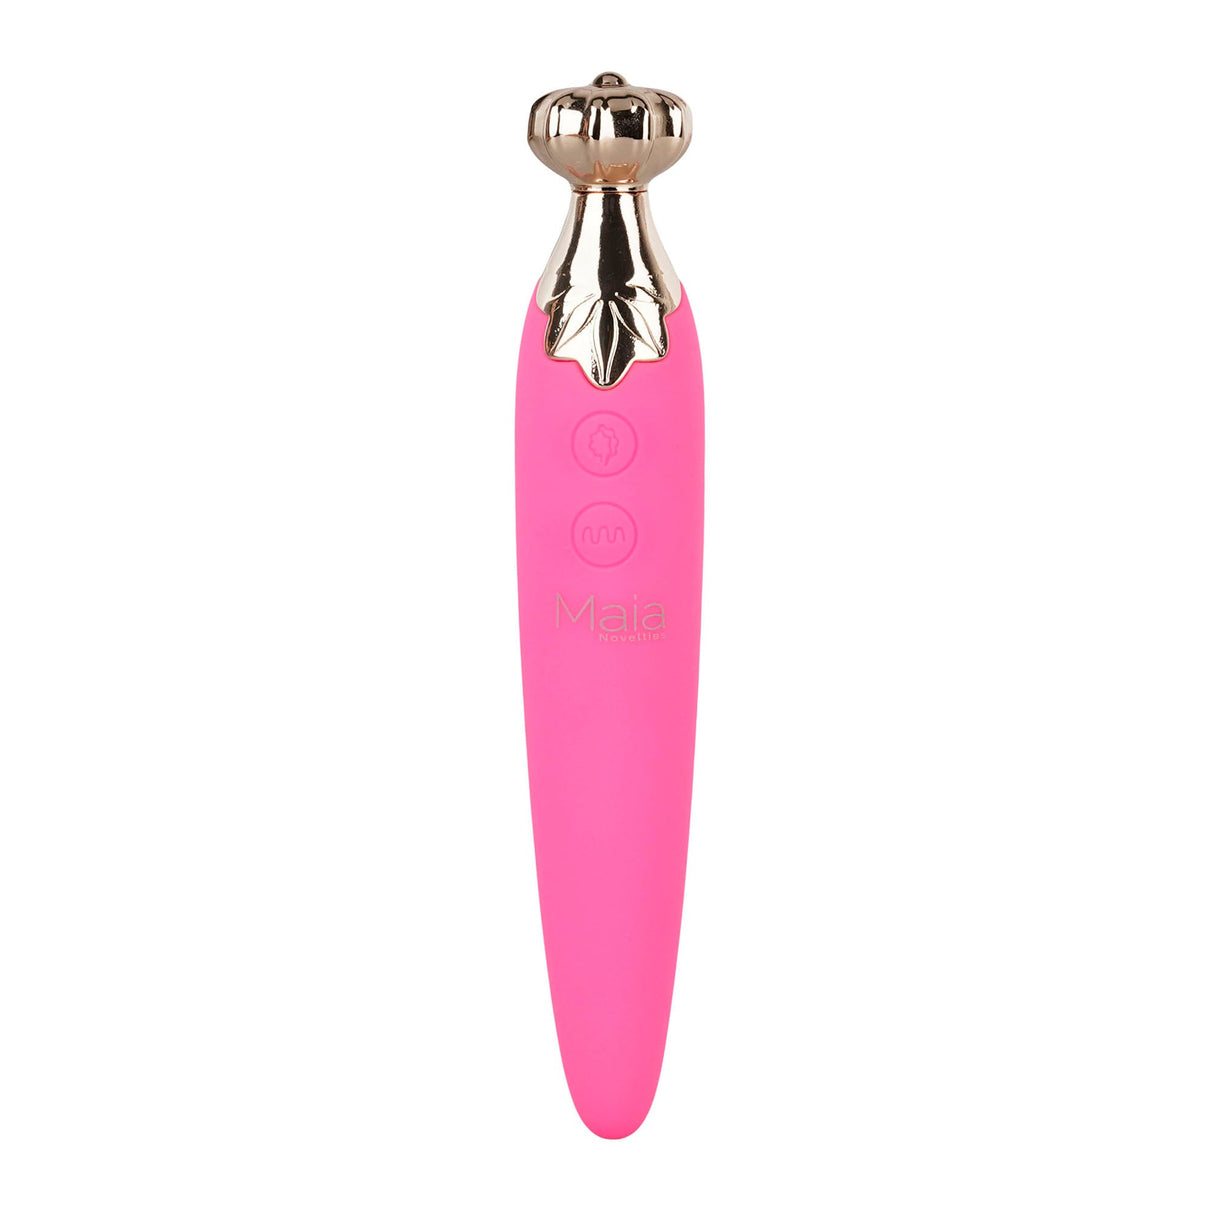 Maia Novelties Vaporator 2-in-1 510 Battery/Personal Massager in Pink, Front View, 400mAh